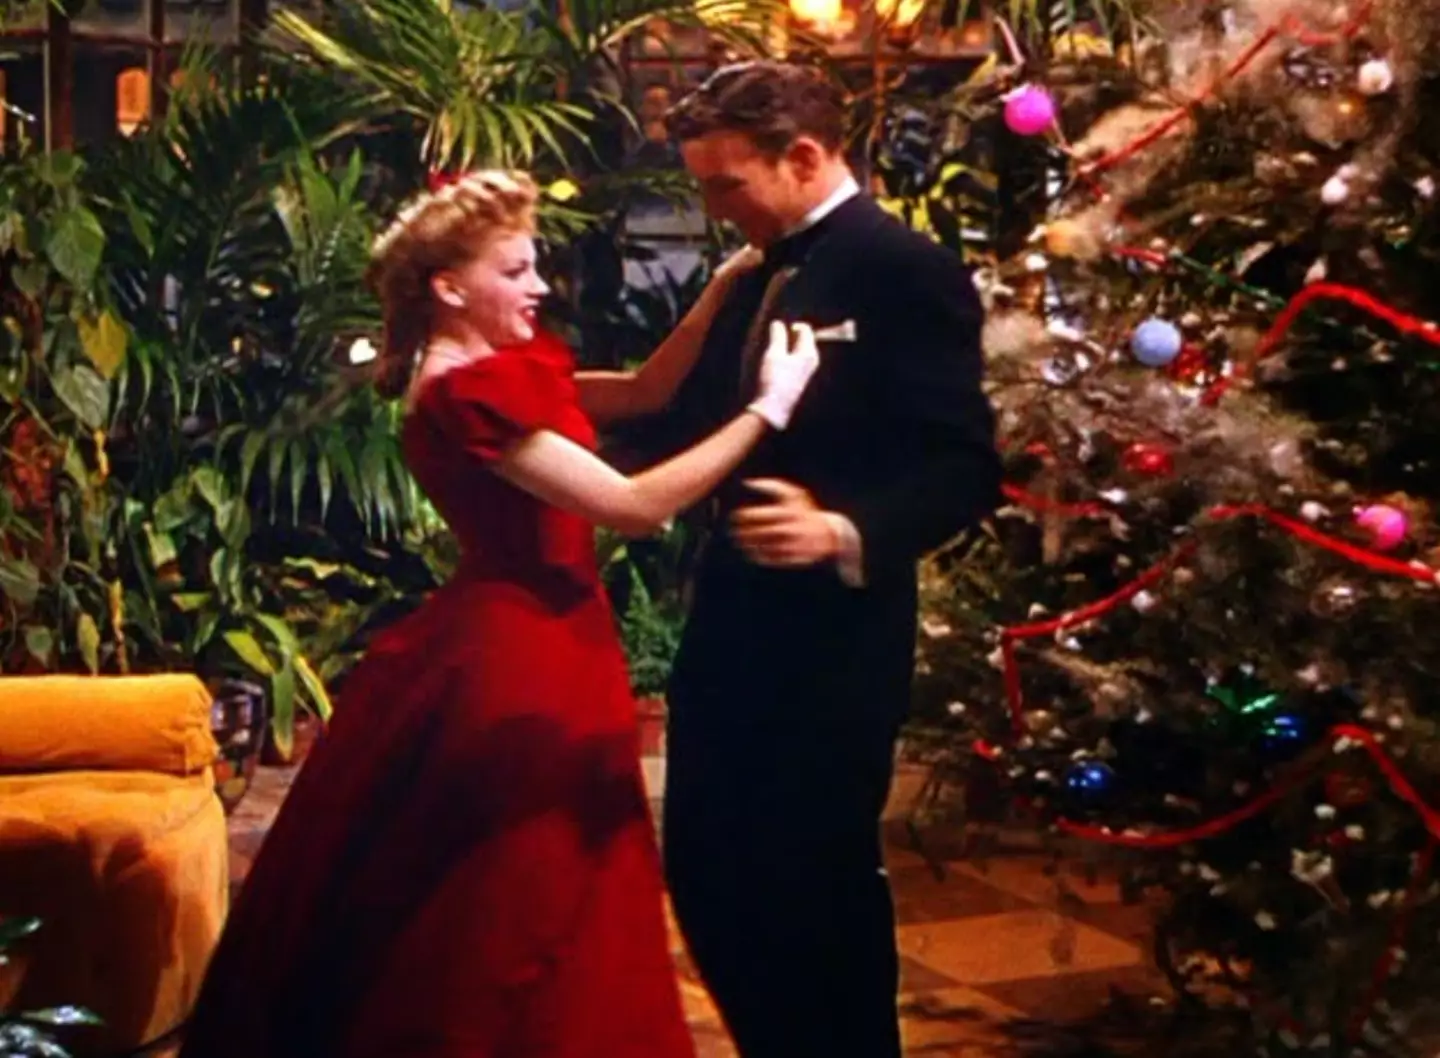 Meet Me in St. Louis is said to be the best Christmas film.